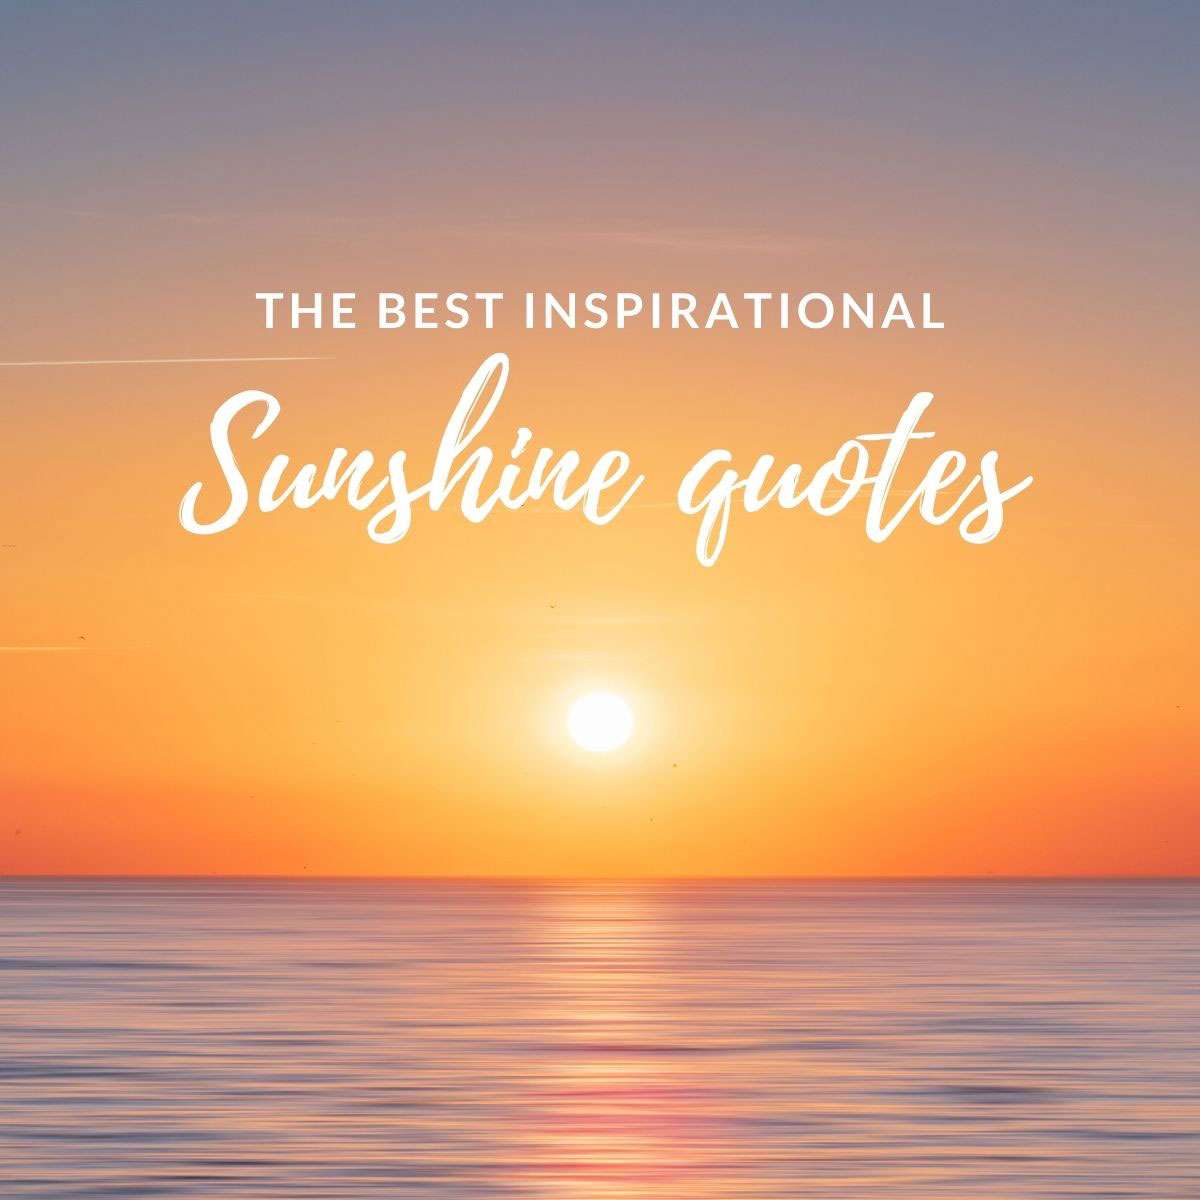 The best inspirational sunshine quotes